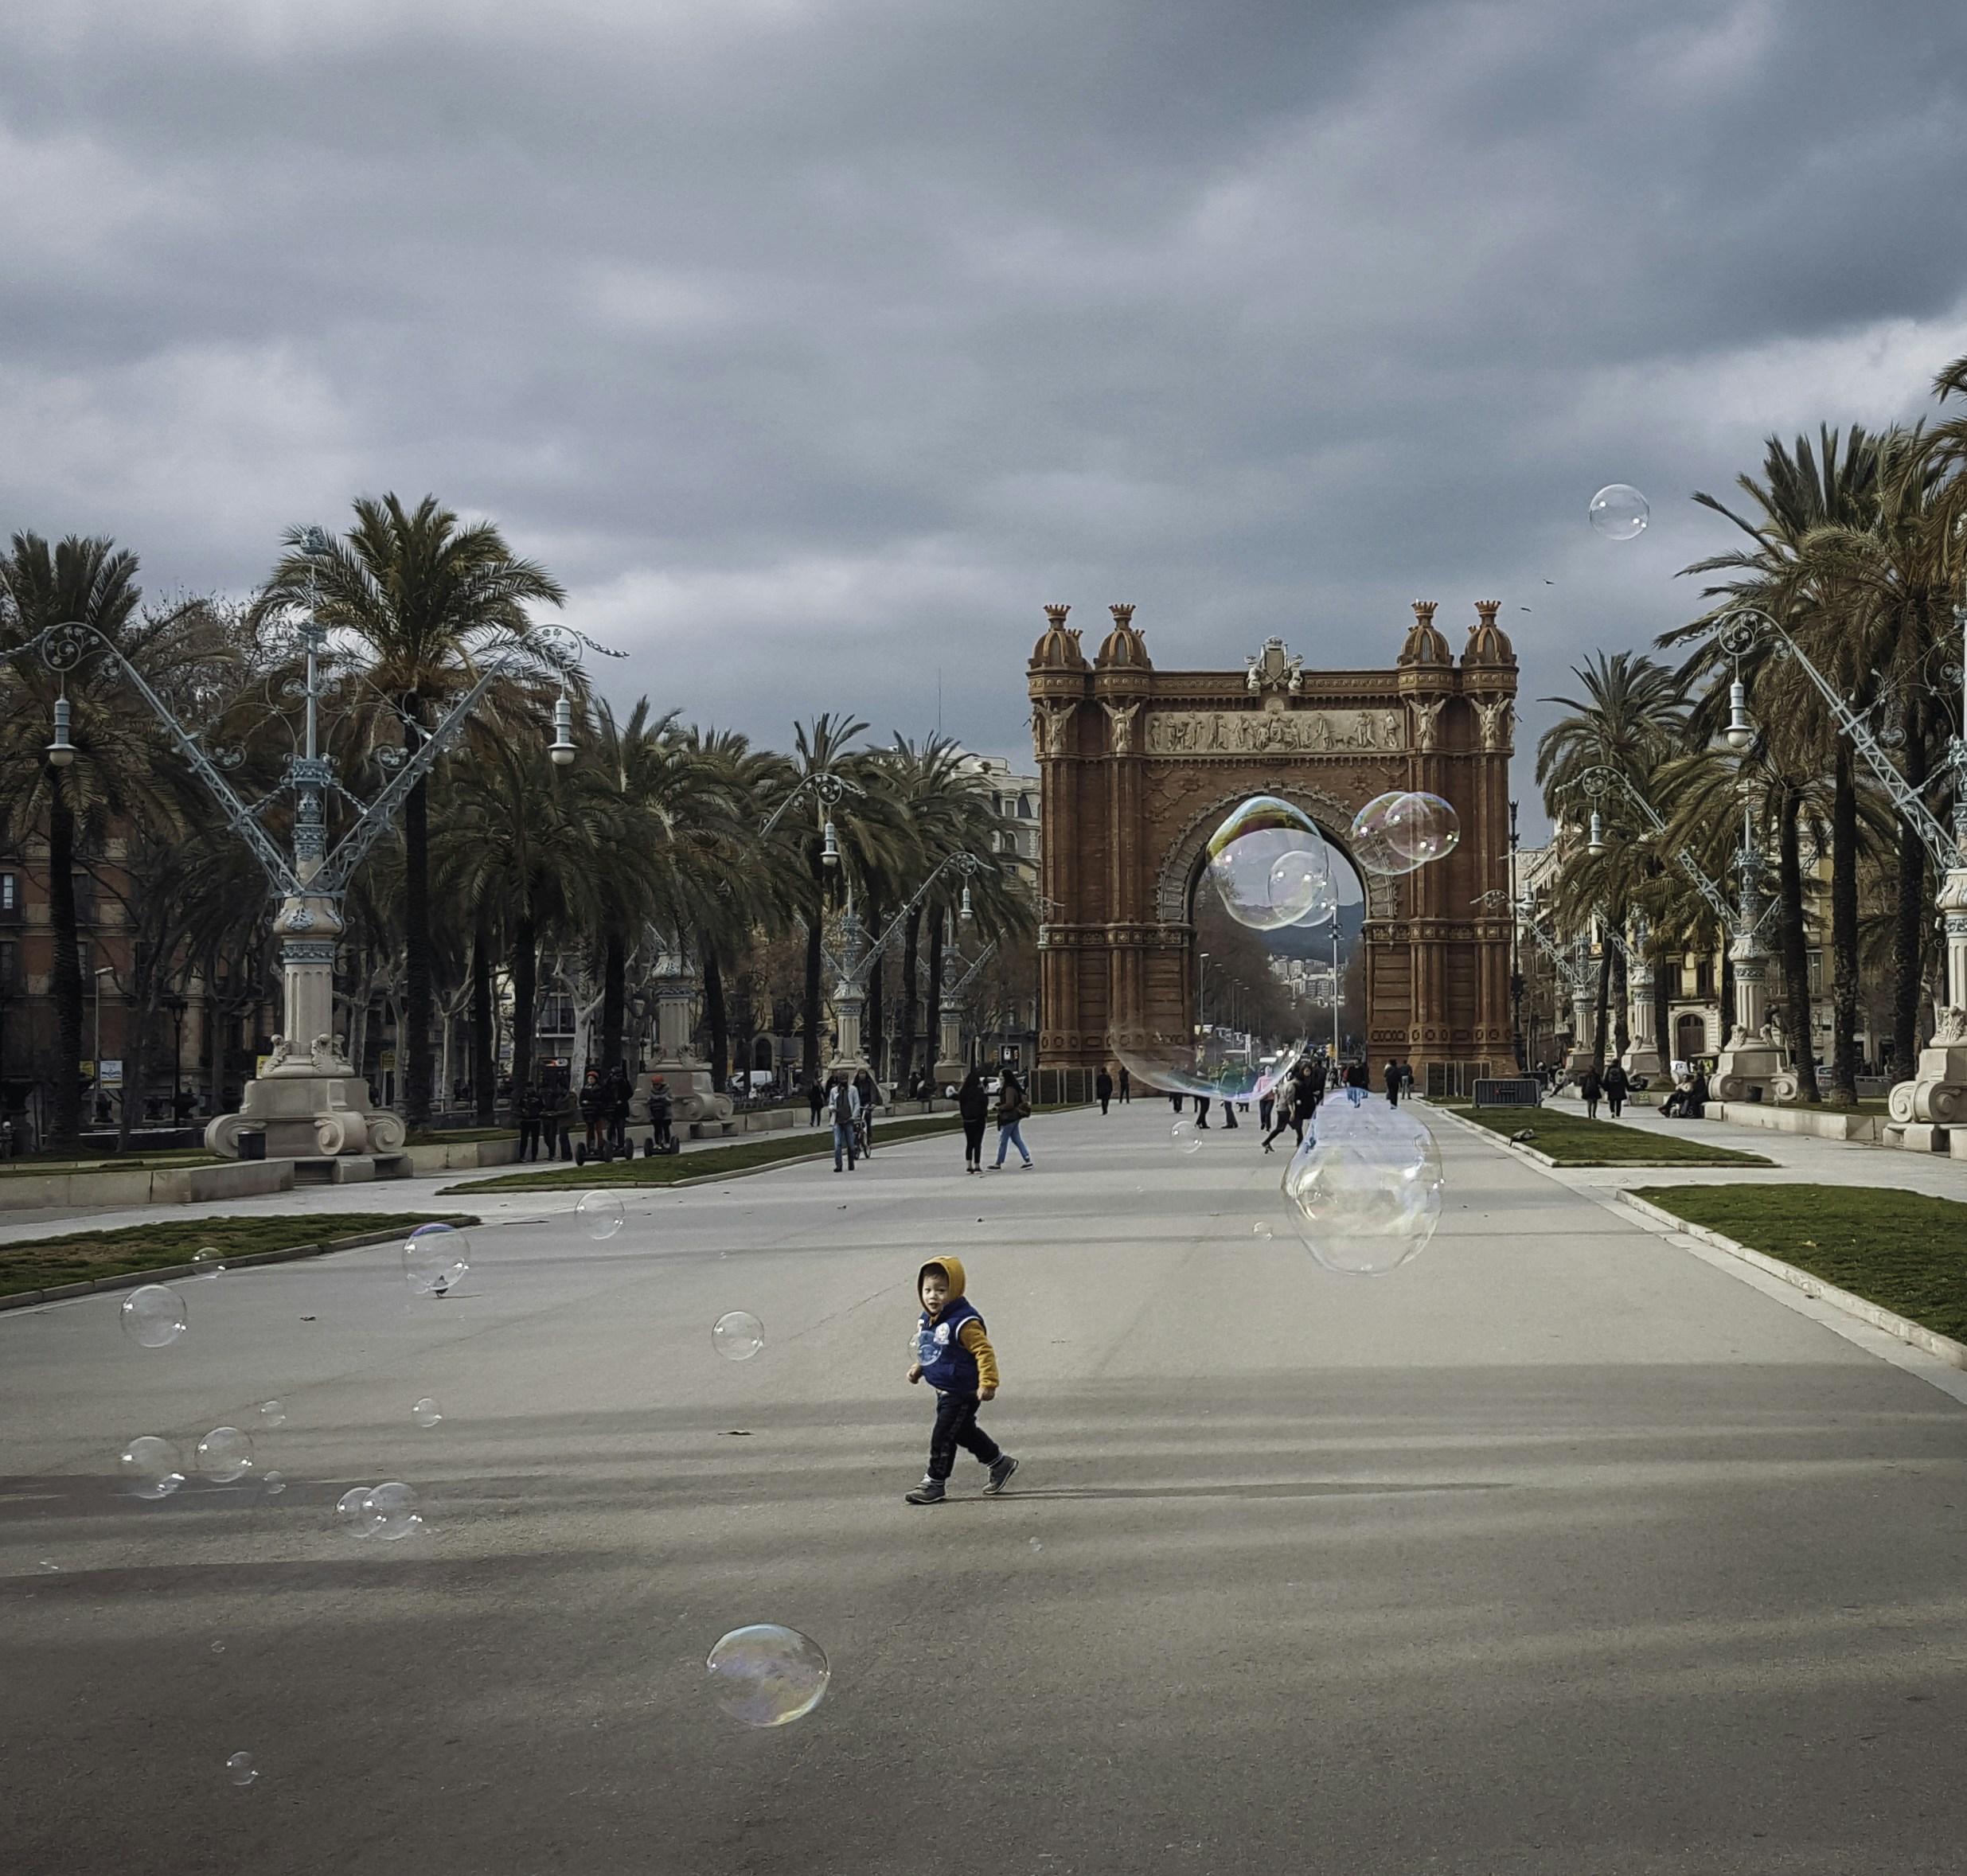 A kid playing with bubbles in Barcelona 🇪🇸